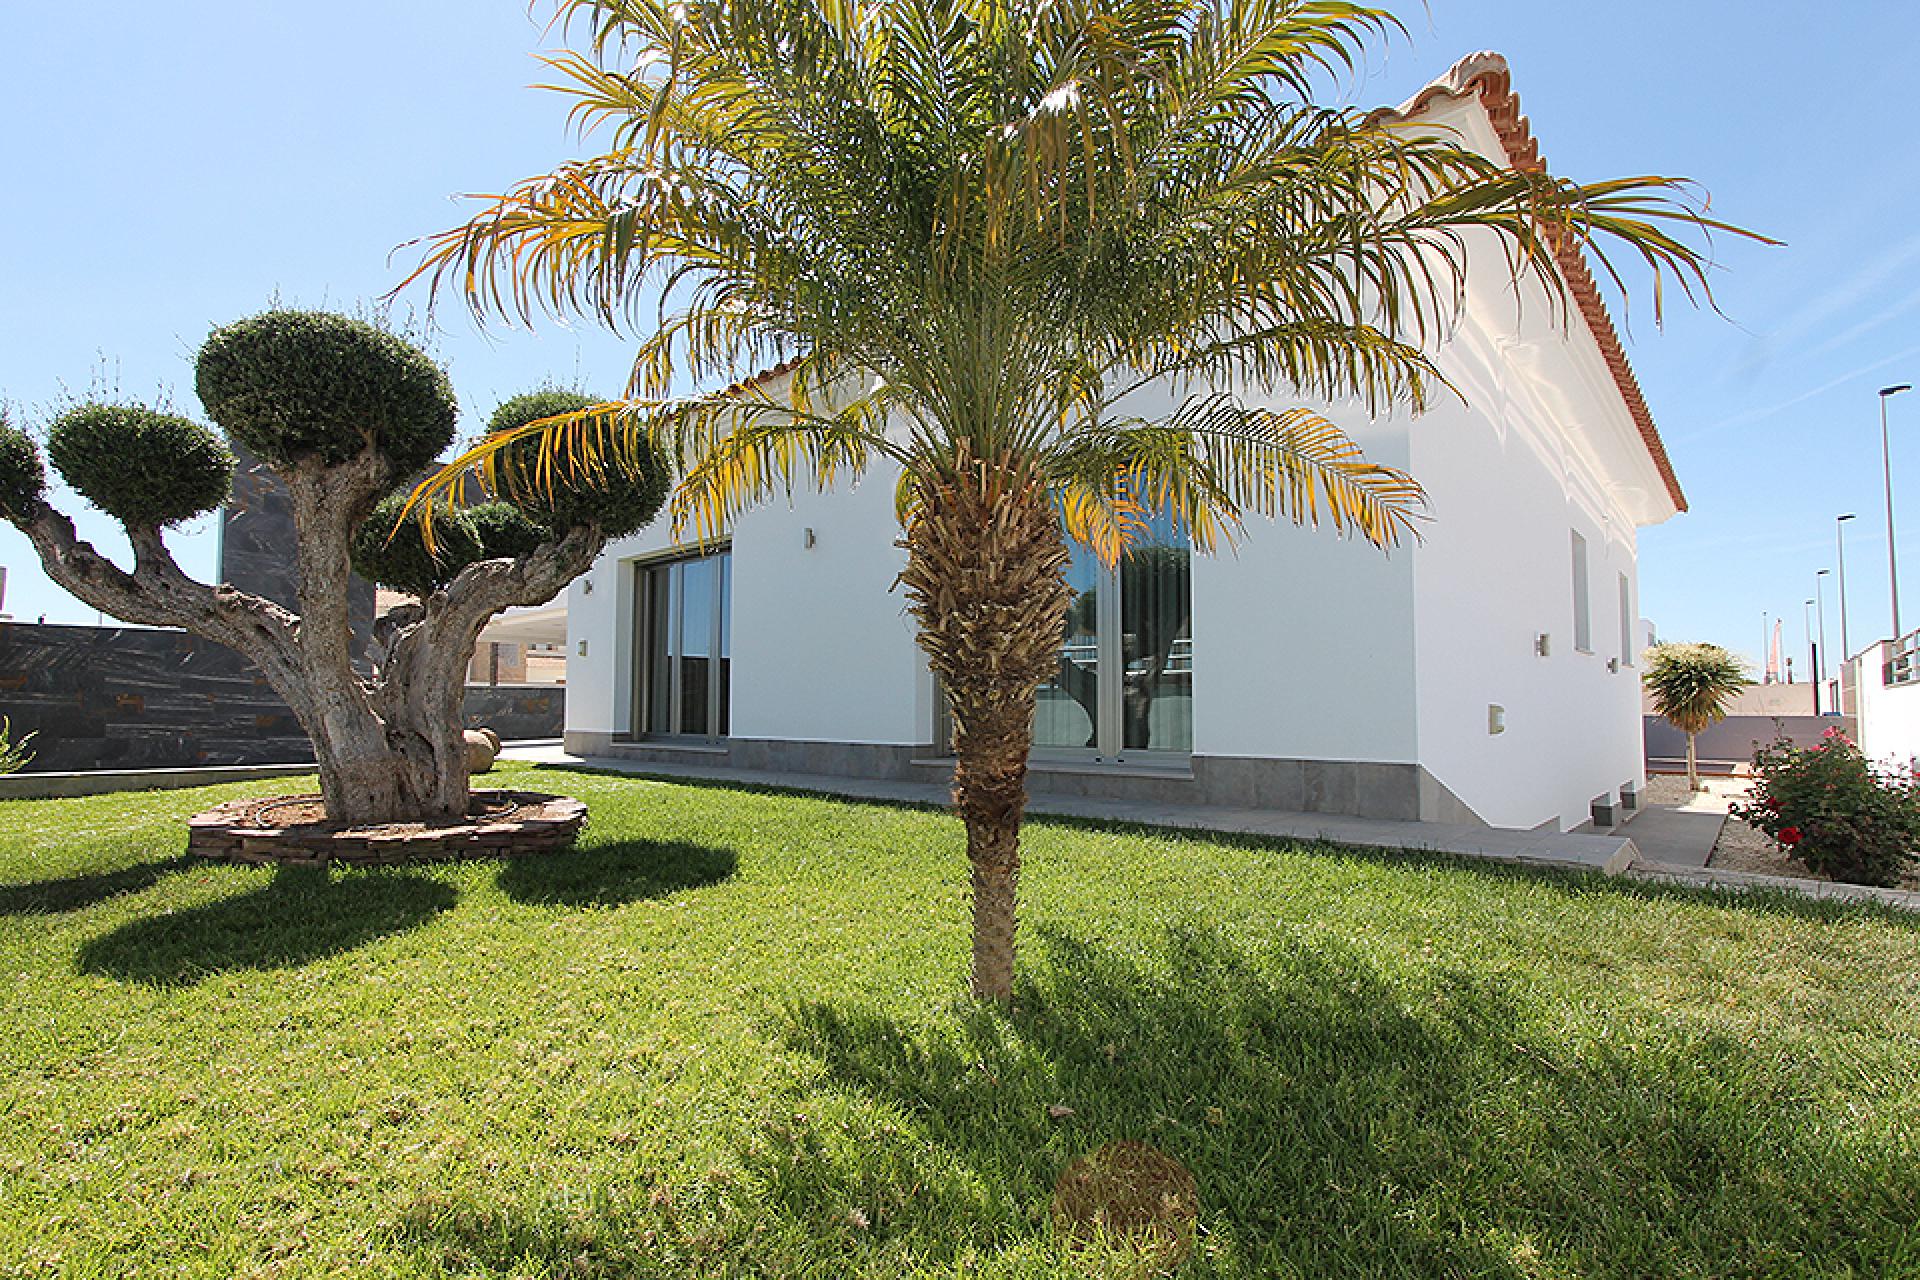 San Pedro del Pinatar, Large luxury villa with 6 bedrooms, garage and private pool 